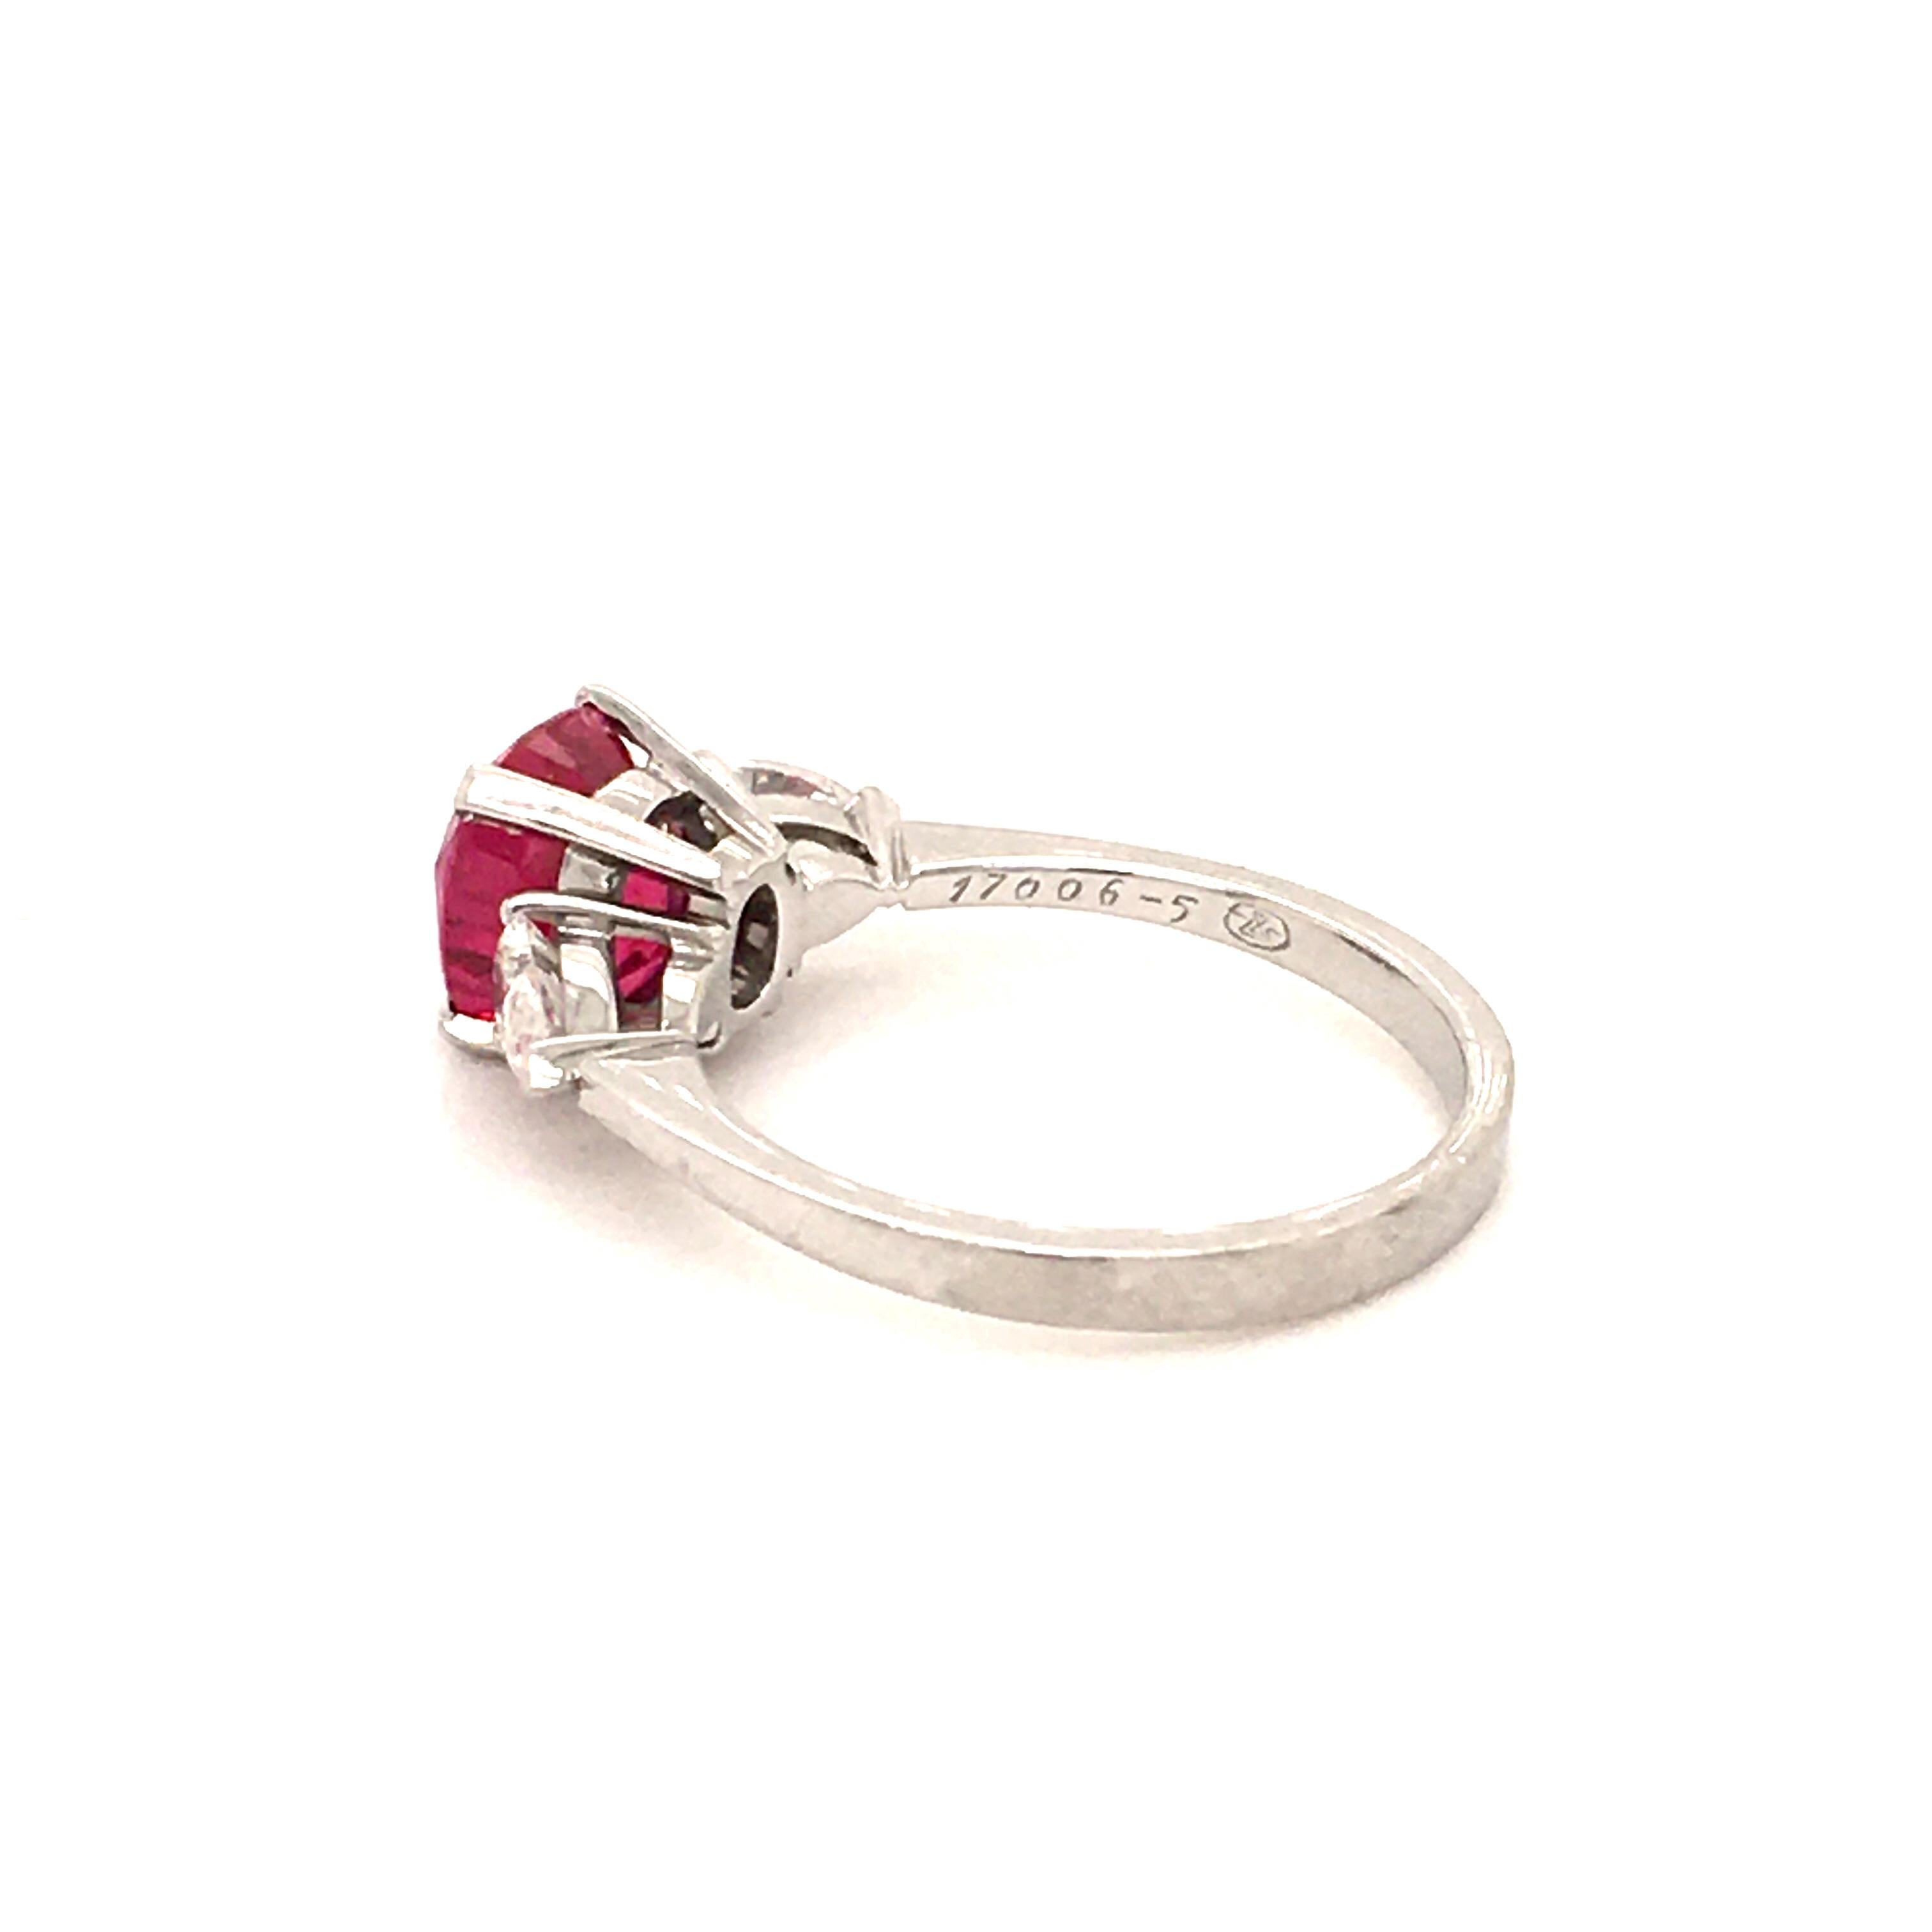 Superb Gubelin Ring with a 2.35 Carat Untreated Burmese Ruby and Diamonds 2